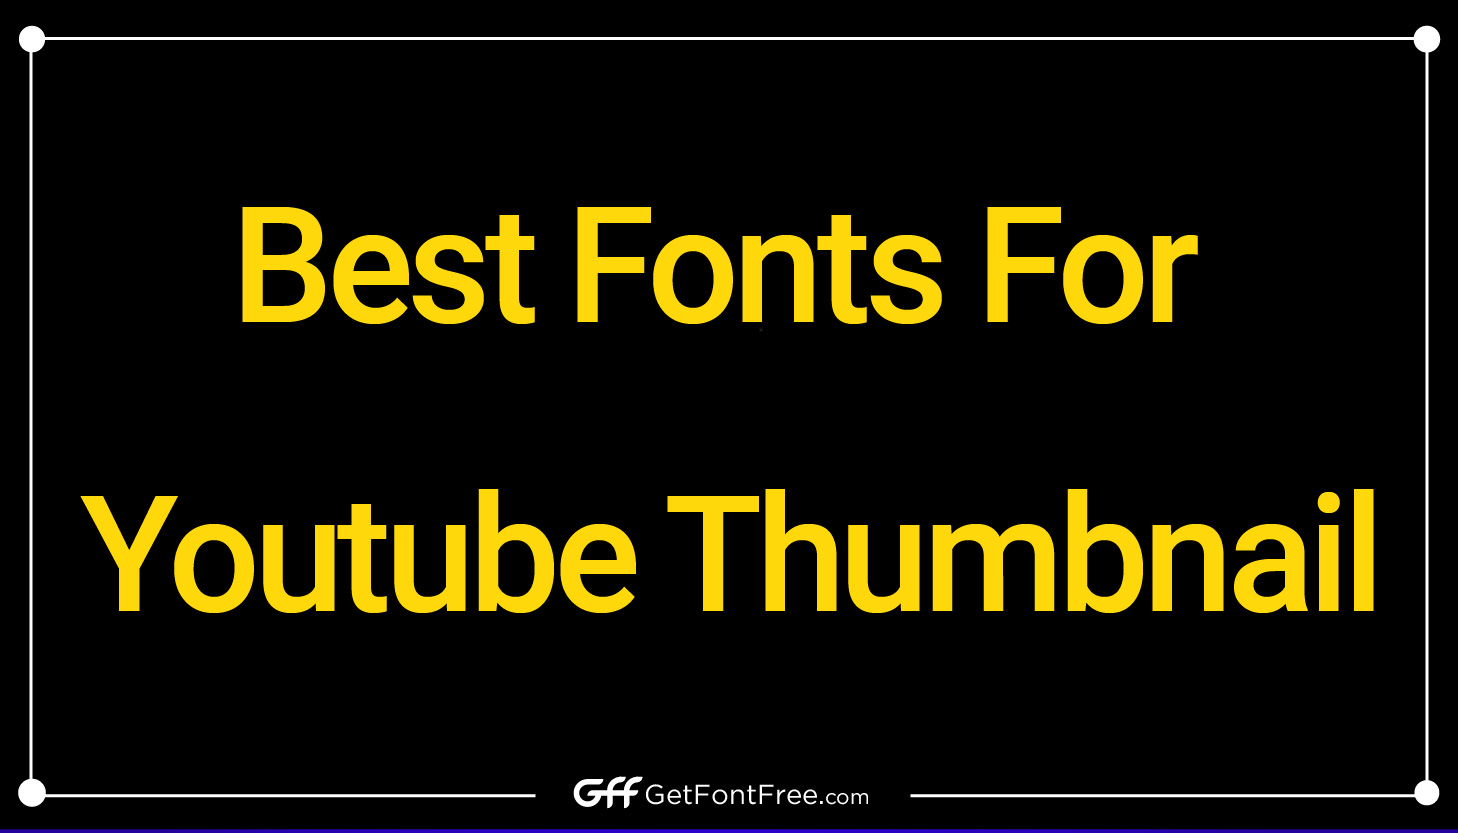 Best Fonts For Youtube Thumbnail